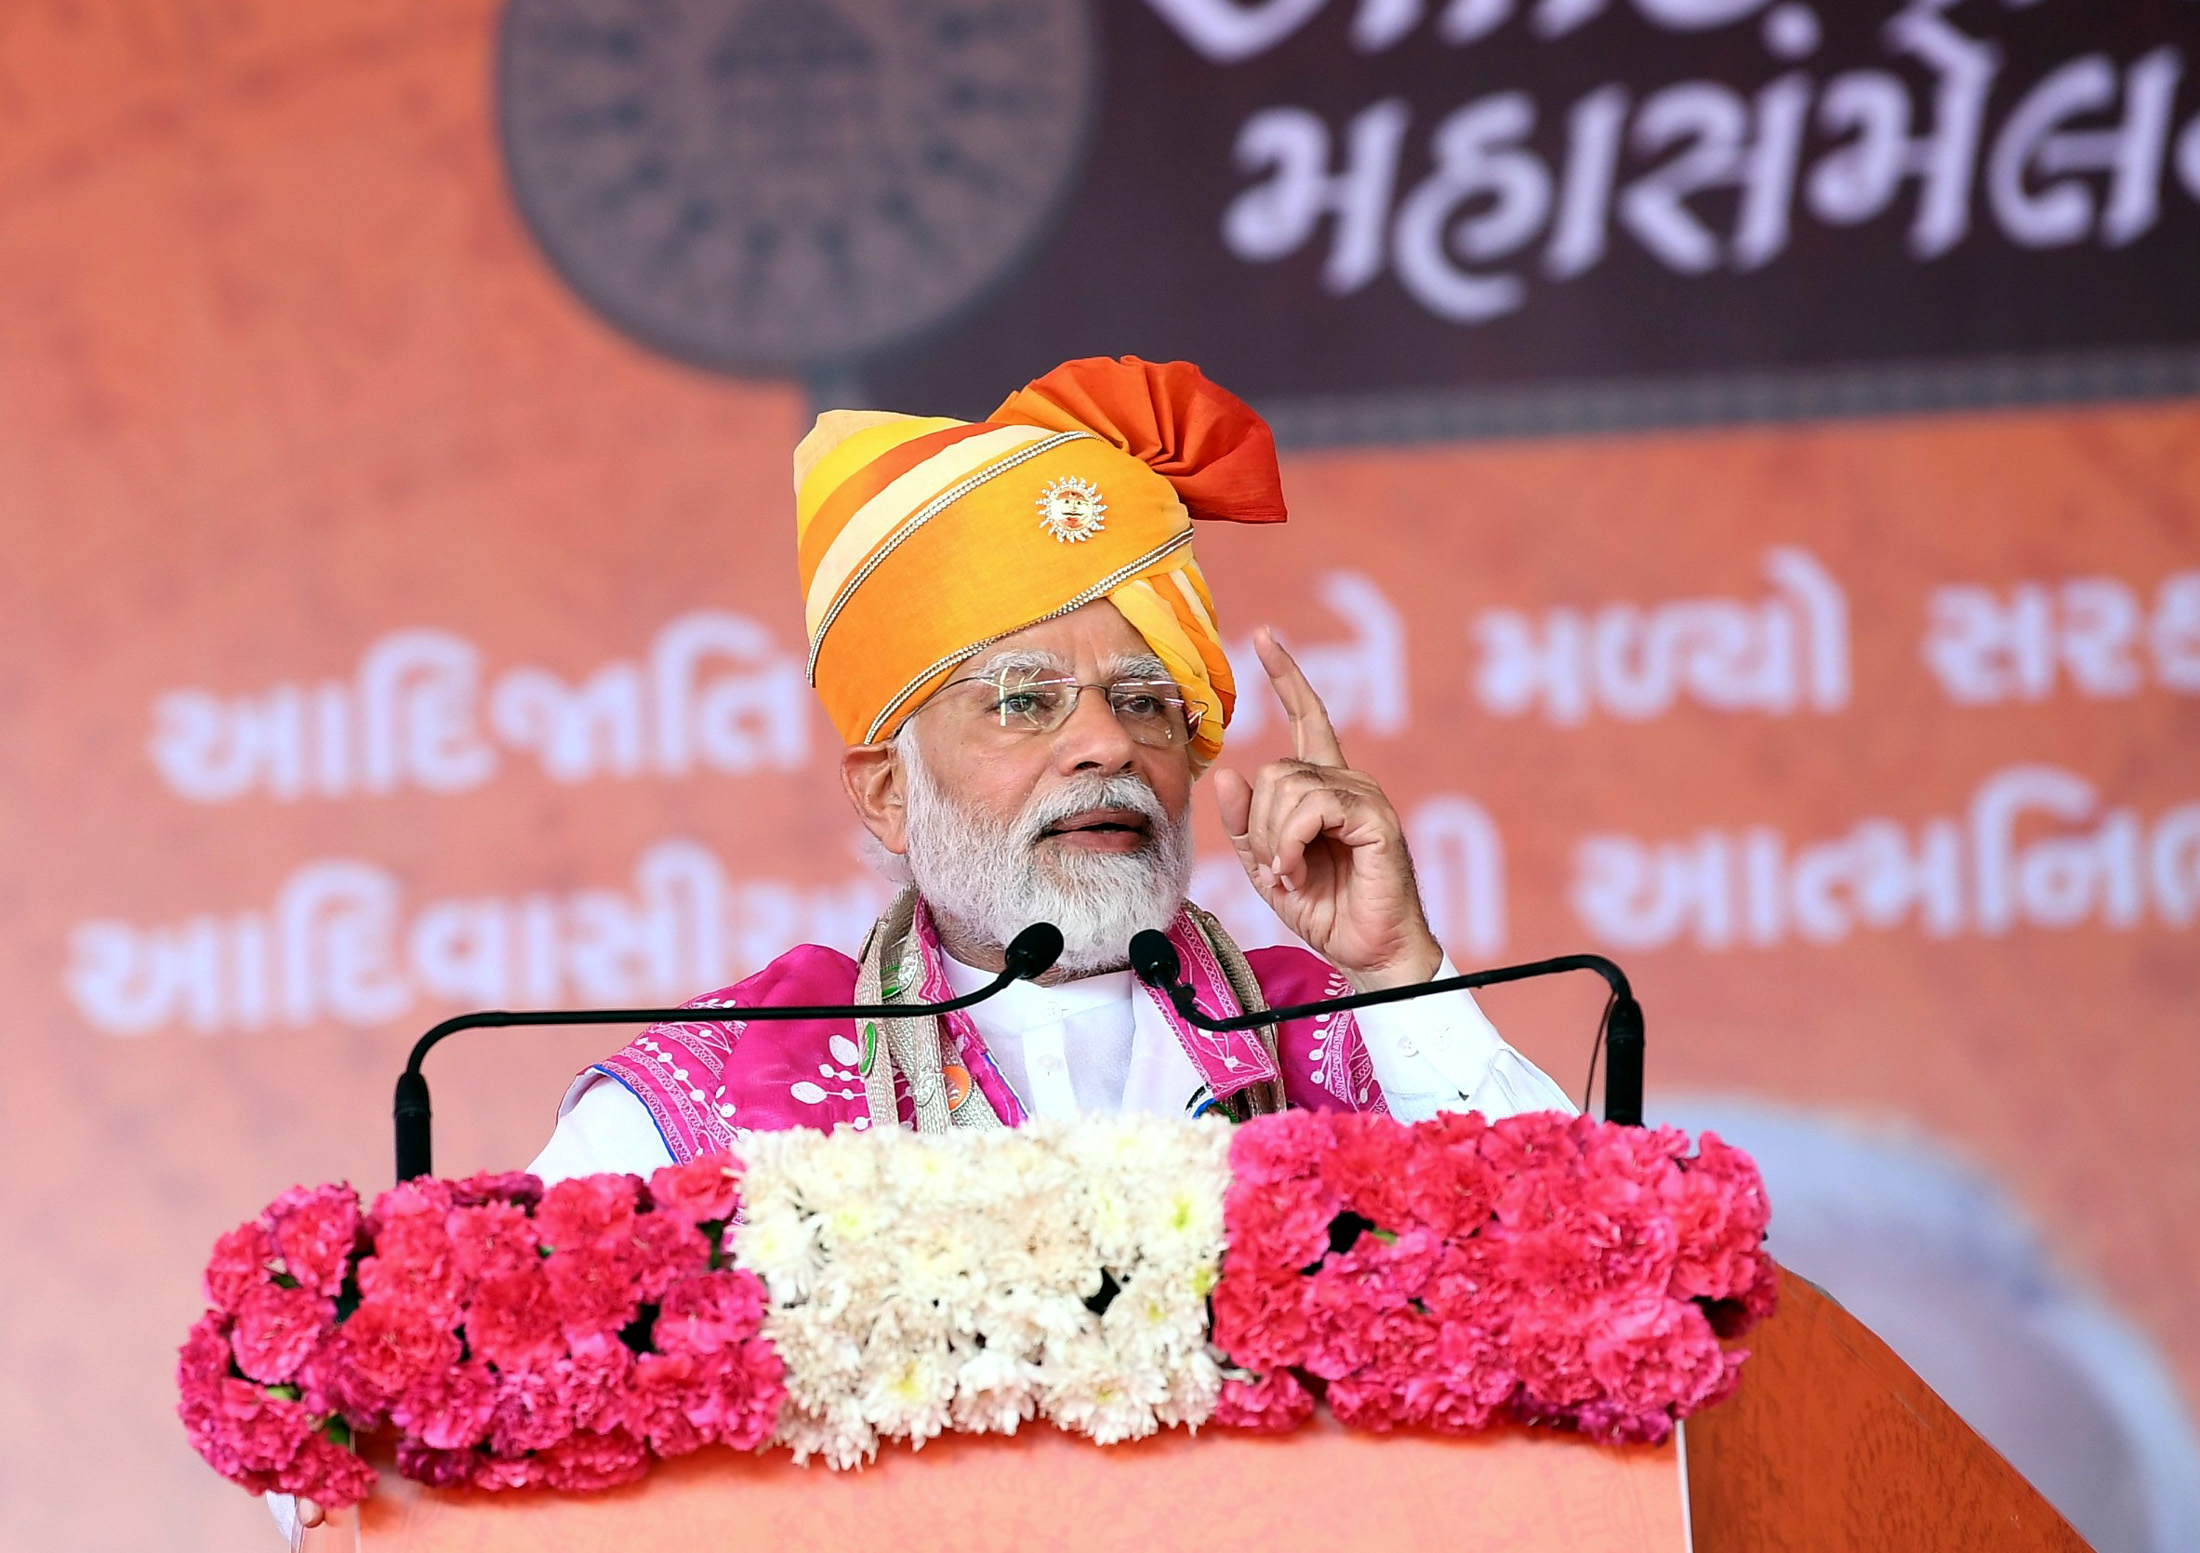 Official details and schedule of PM Modi ‘s visit to Gujarat on 29-30 September